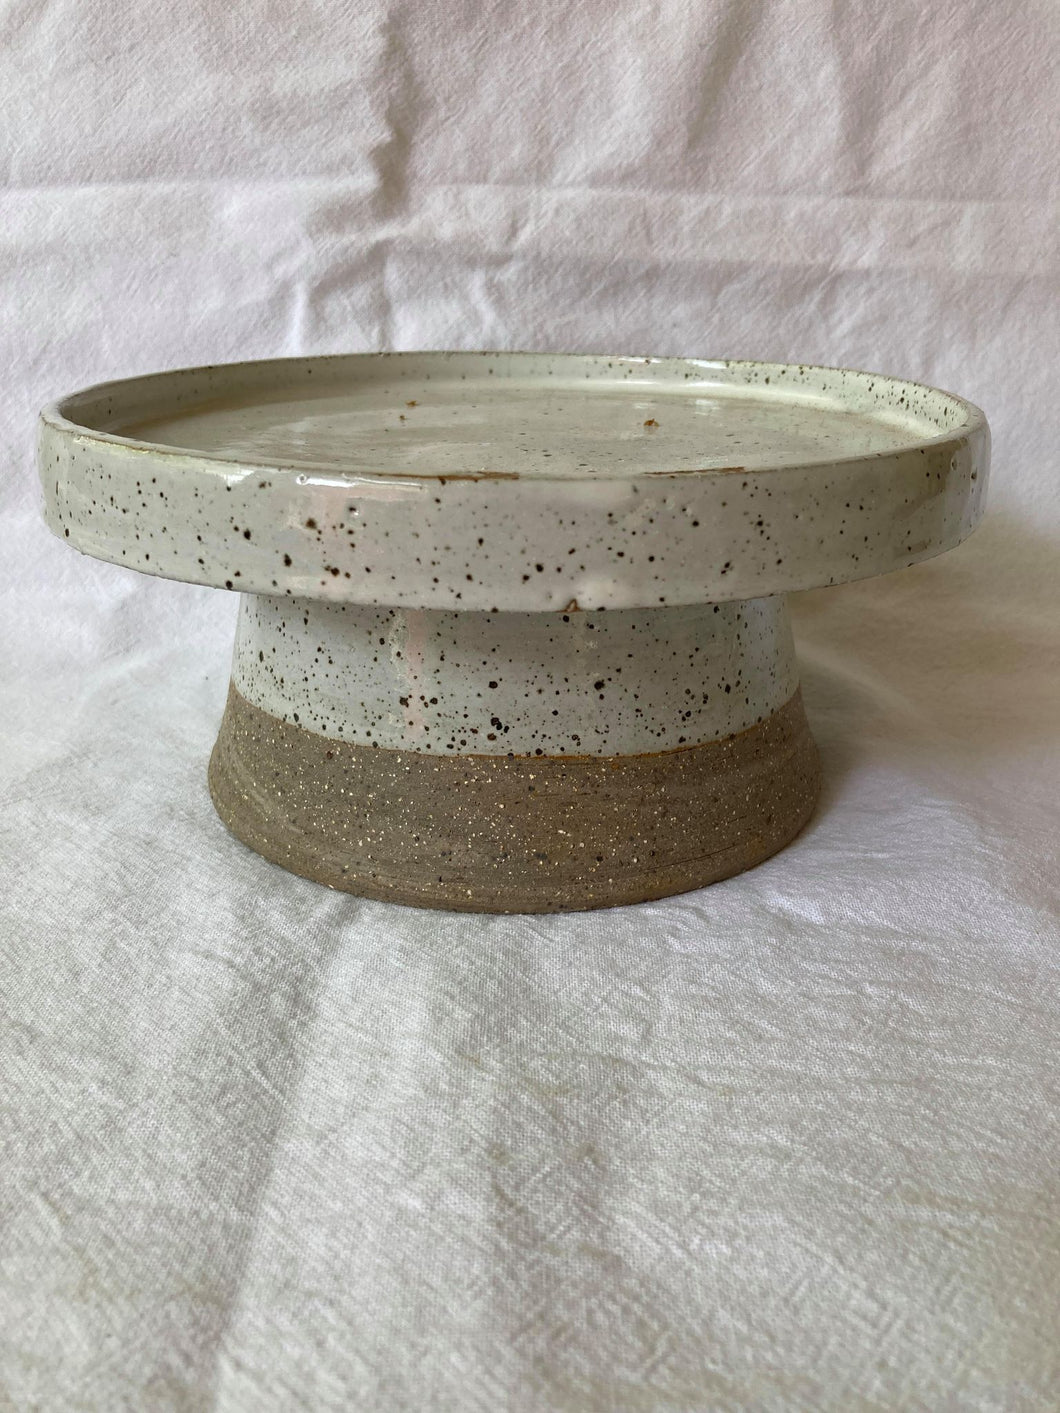 Upper Crust Ceramic Cake Stand With Server - Ellementry